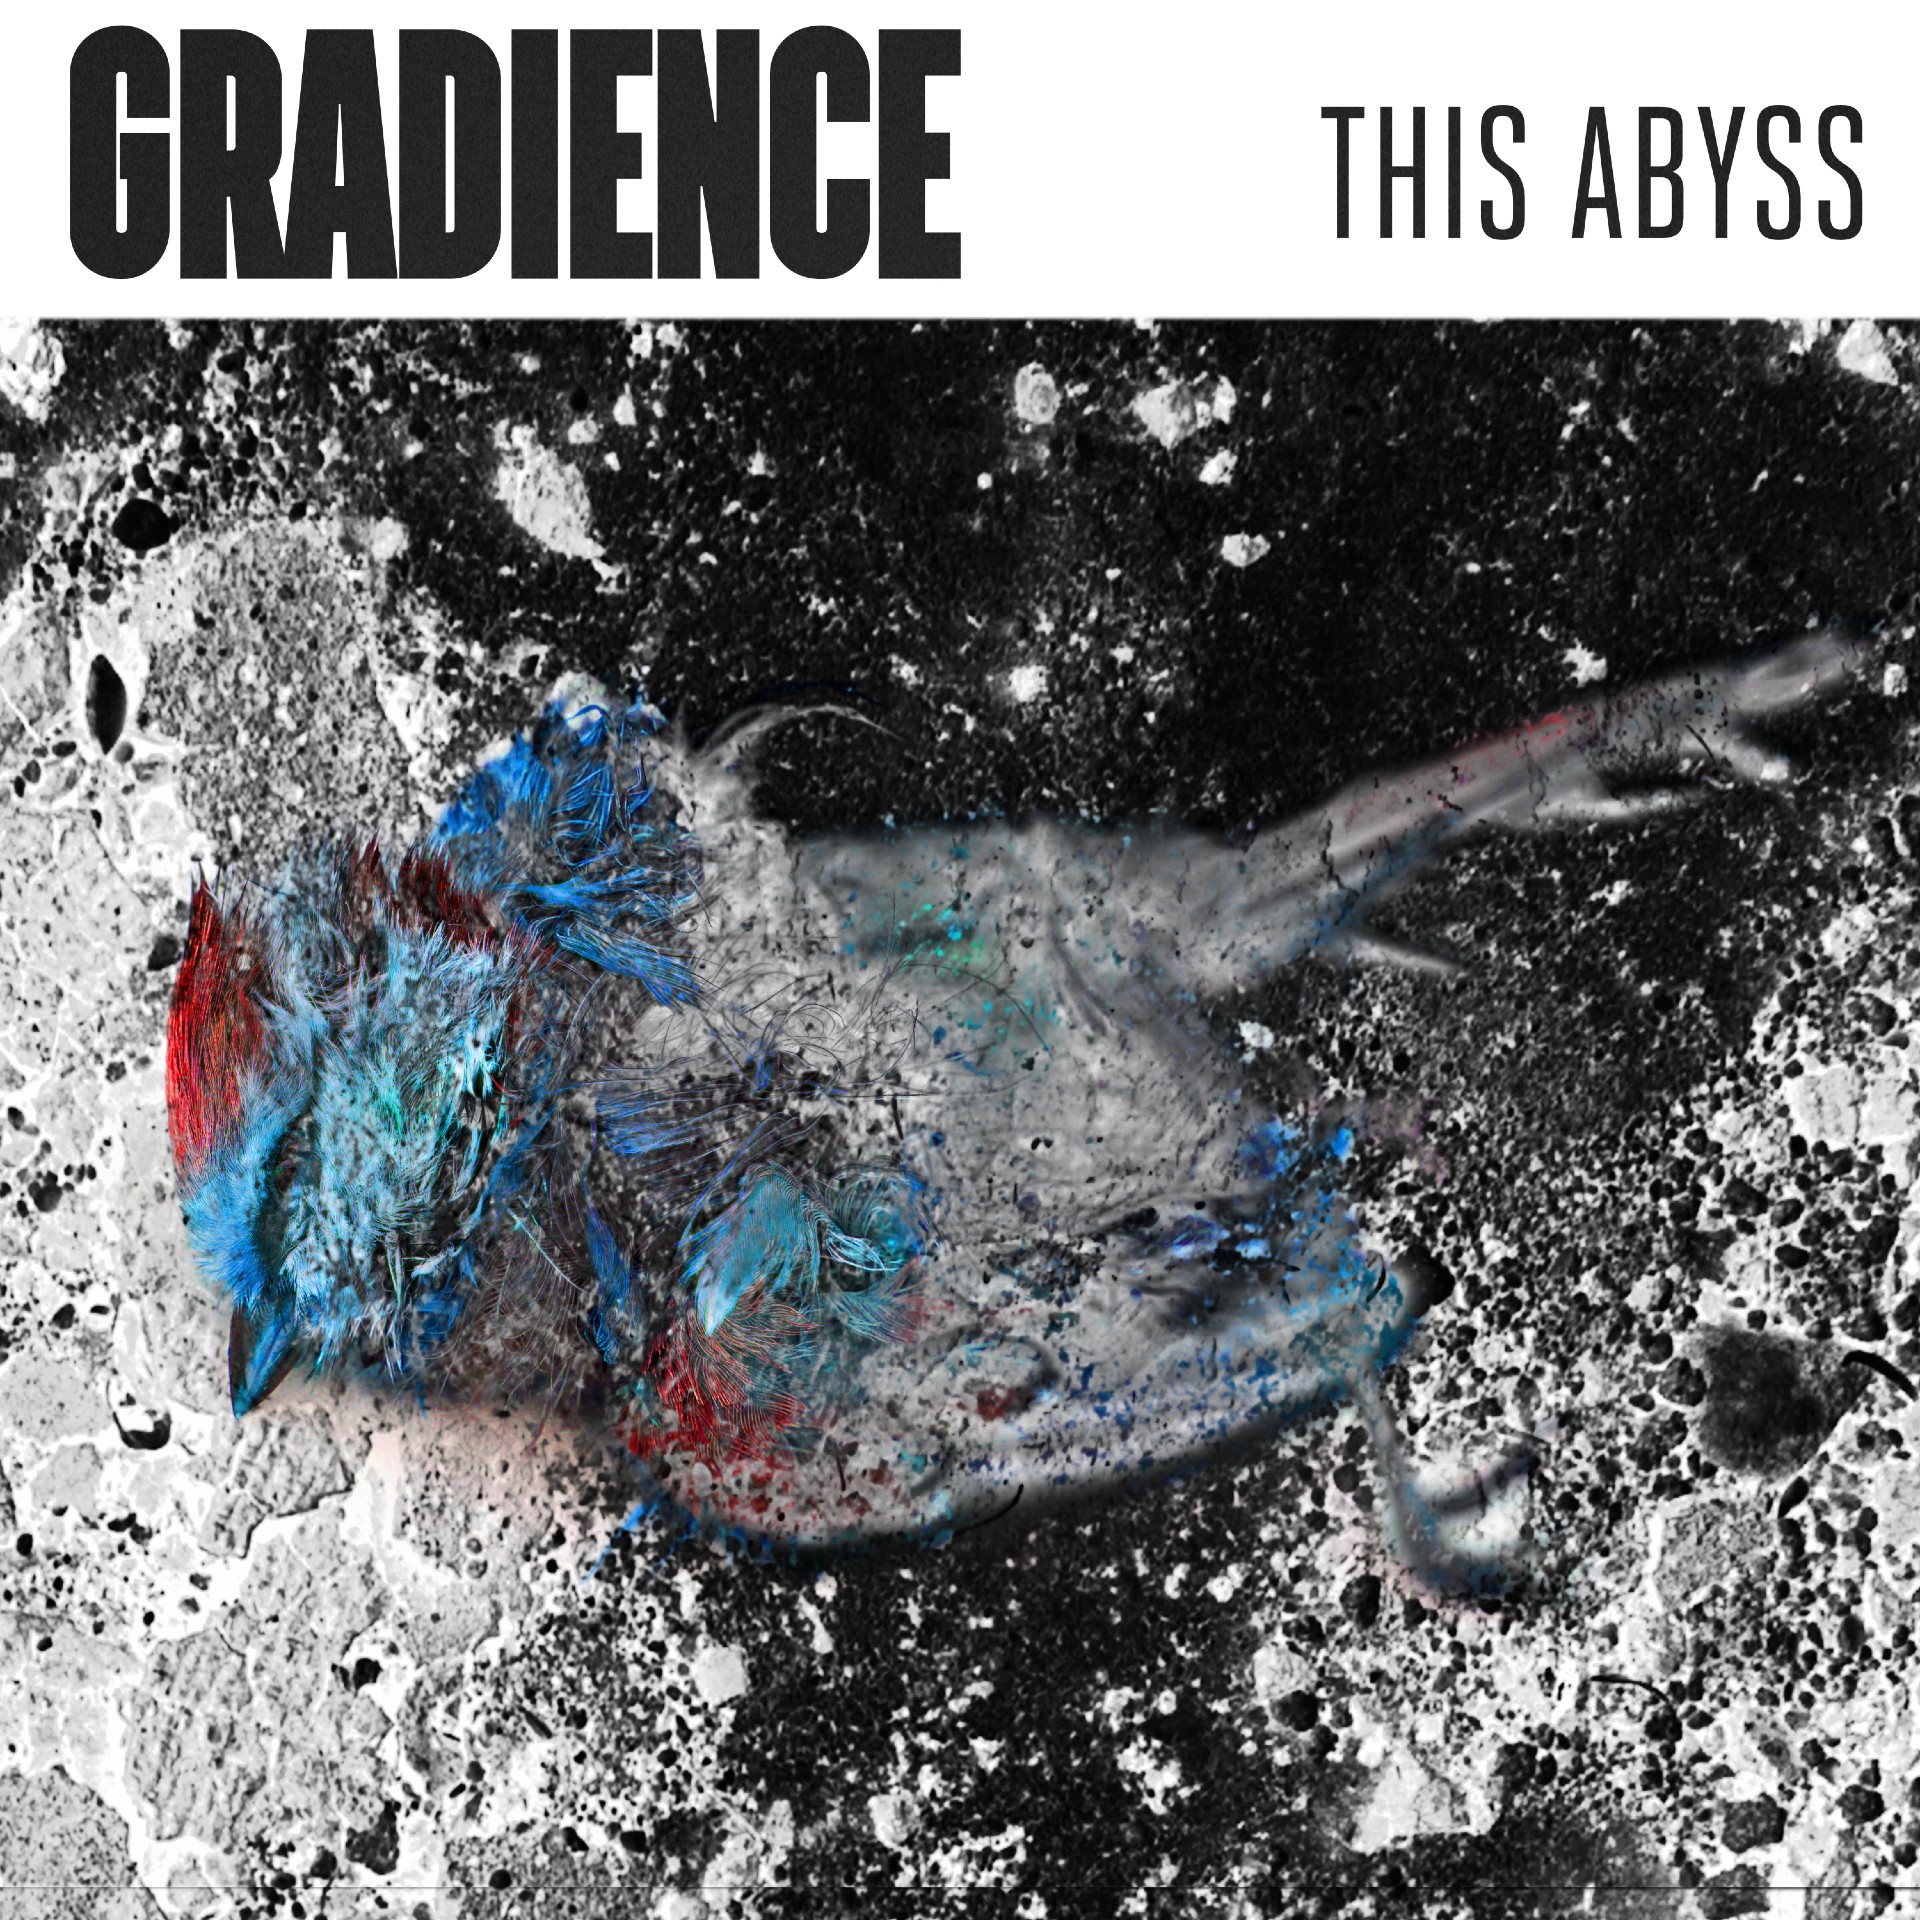 Gradience “This Abyss” single artwork